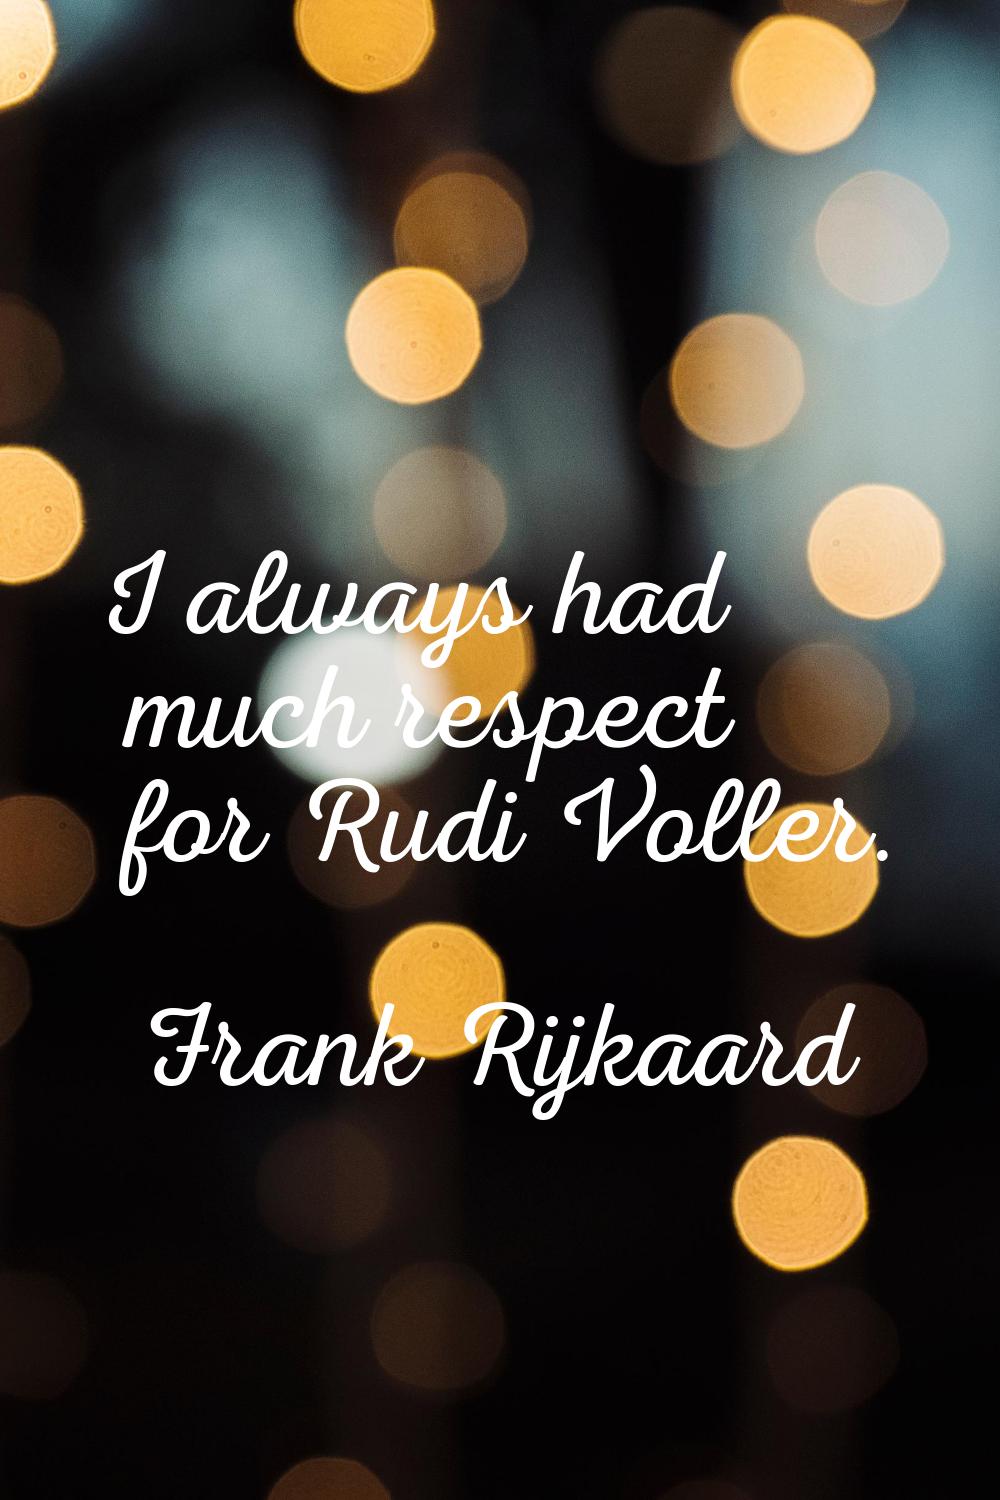 I always had much respect for Rudi Voller.